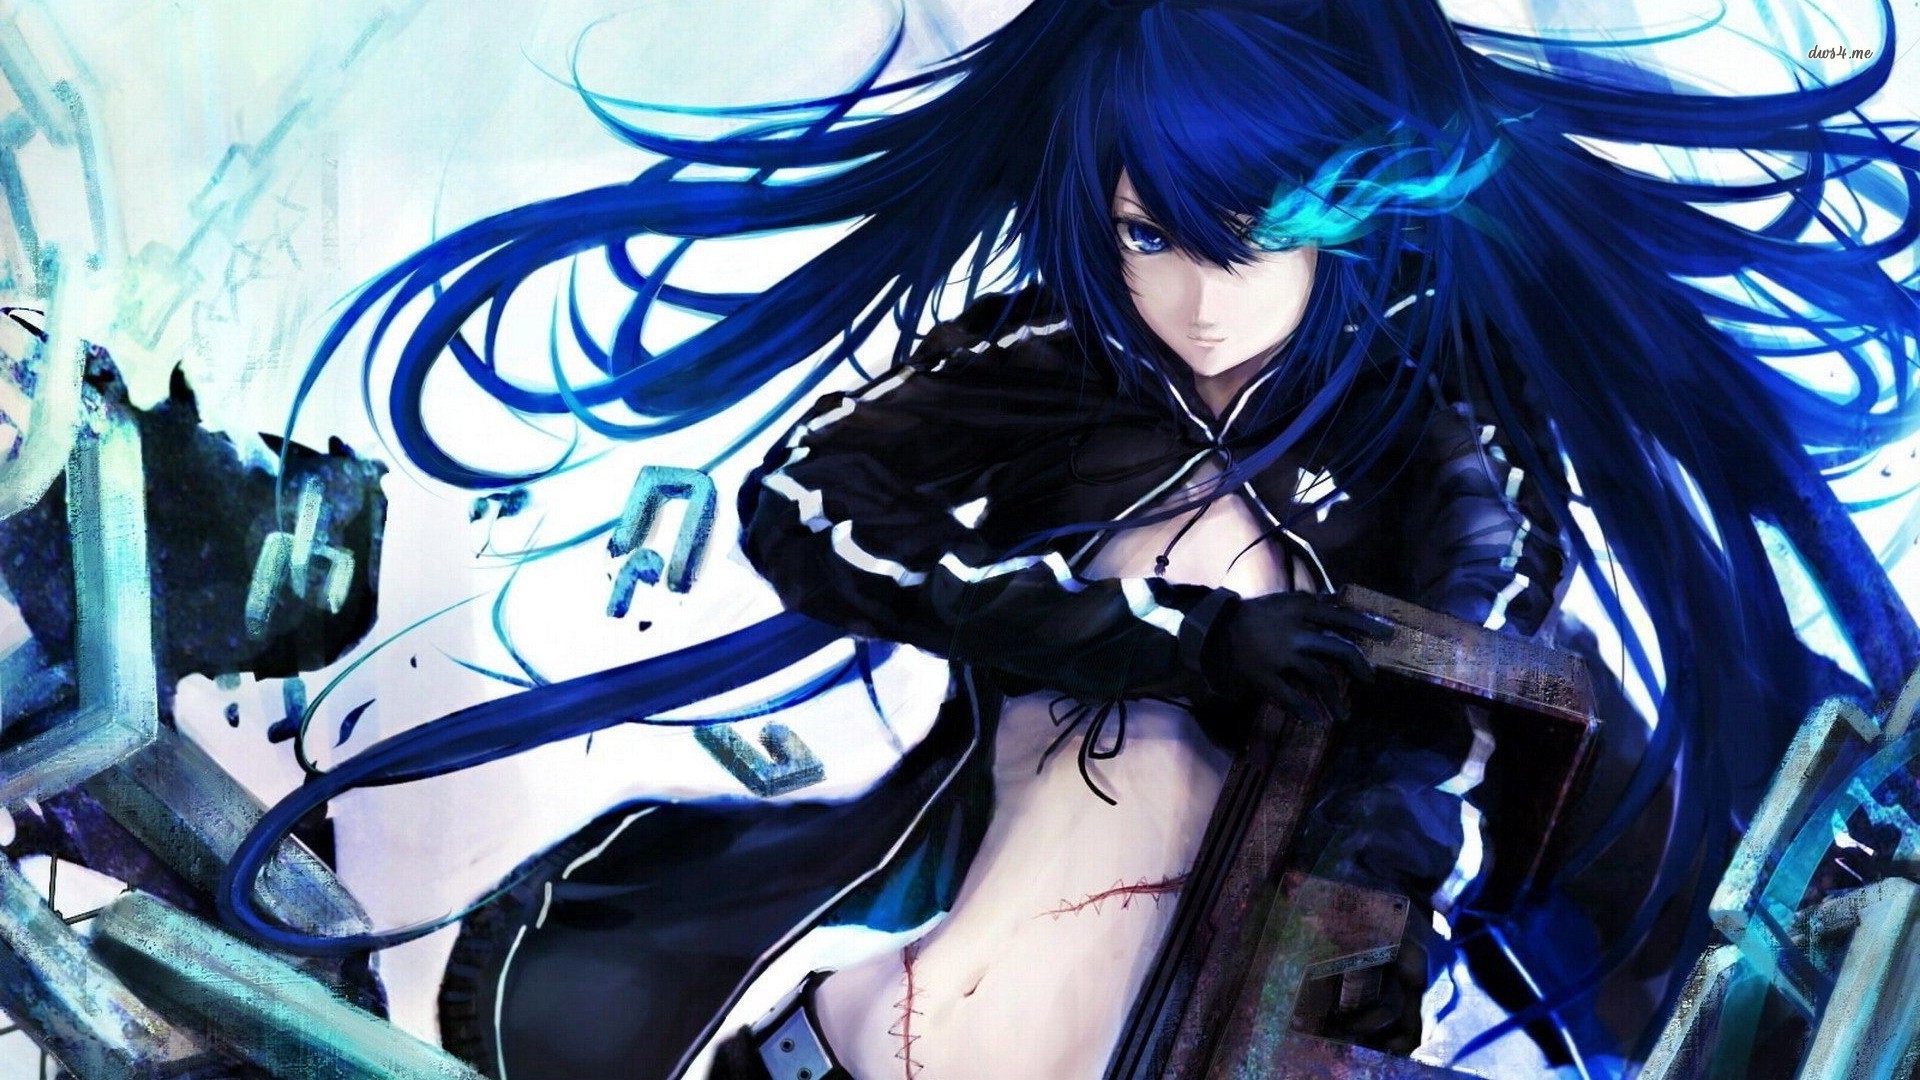 Stella from Black Rock Shooter Wallpaper HD Wallpapers Download